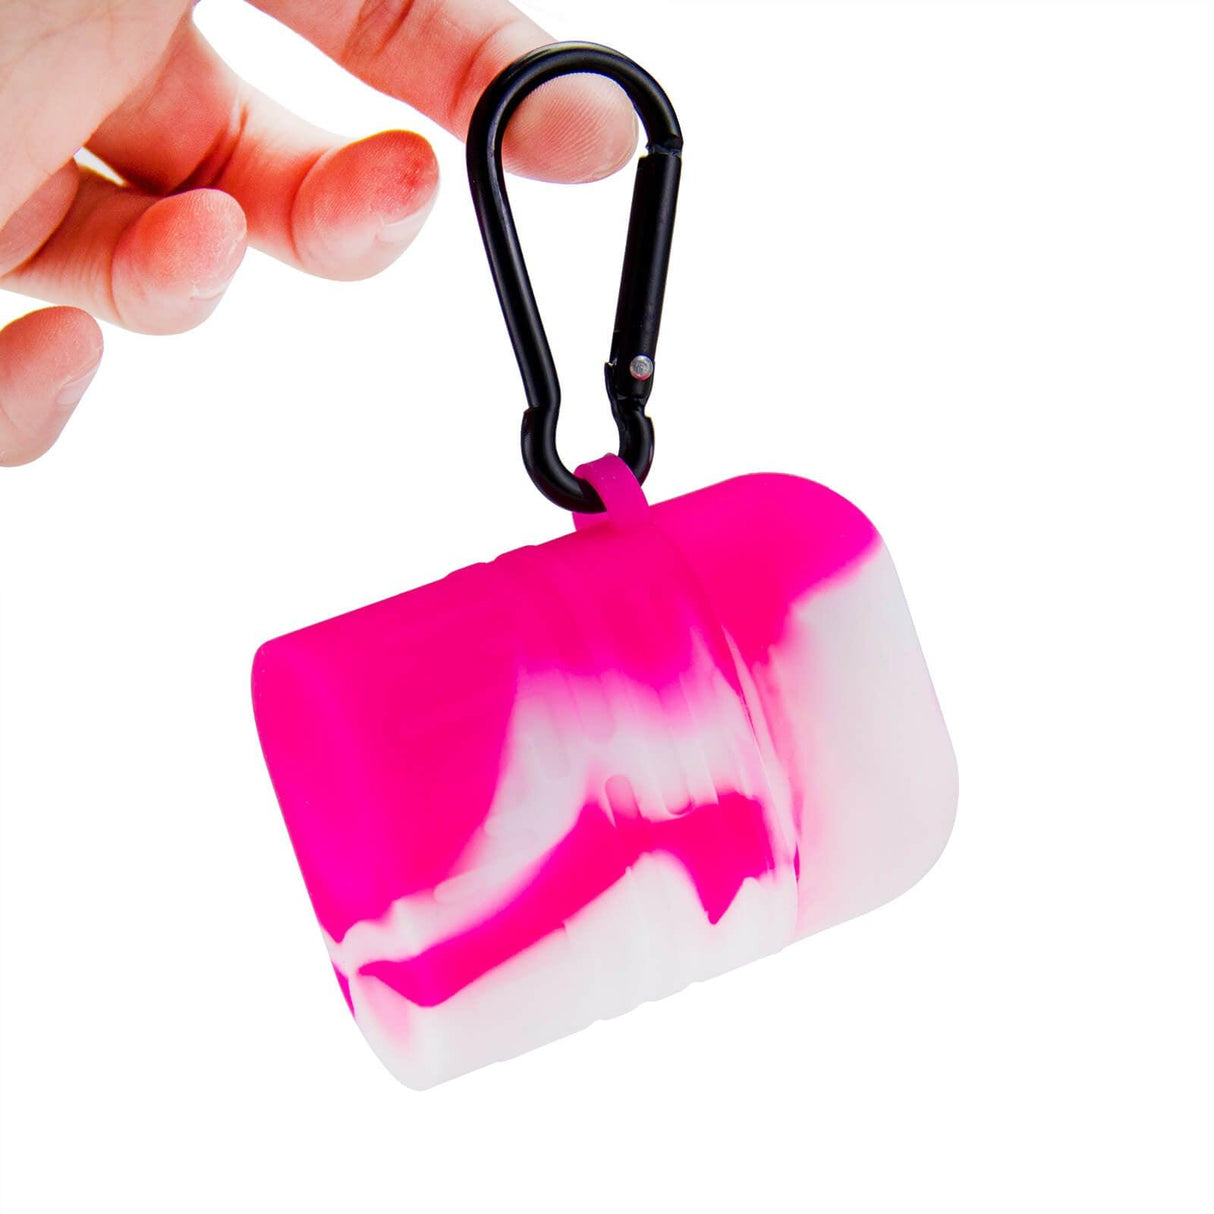 PILOT DIARY Silicone Dugout One Hitter Set in Pink, with Carabiner Clip, Handheld Size